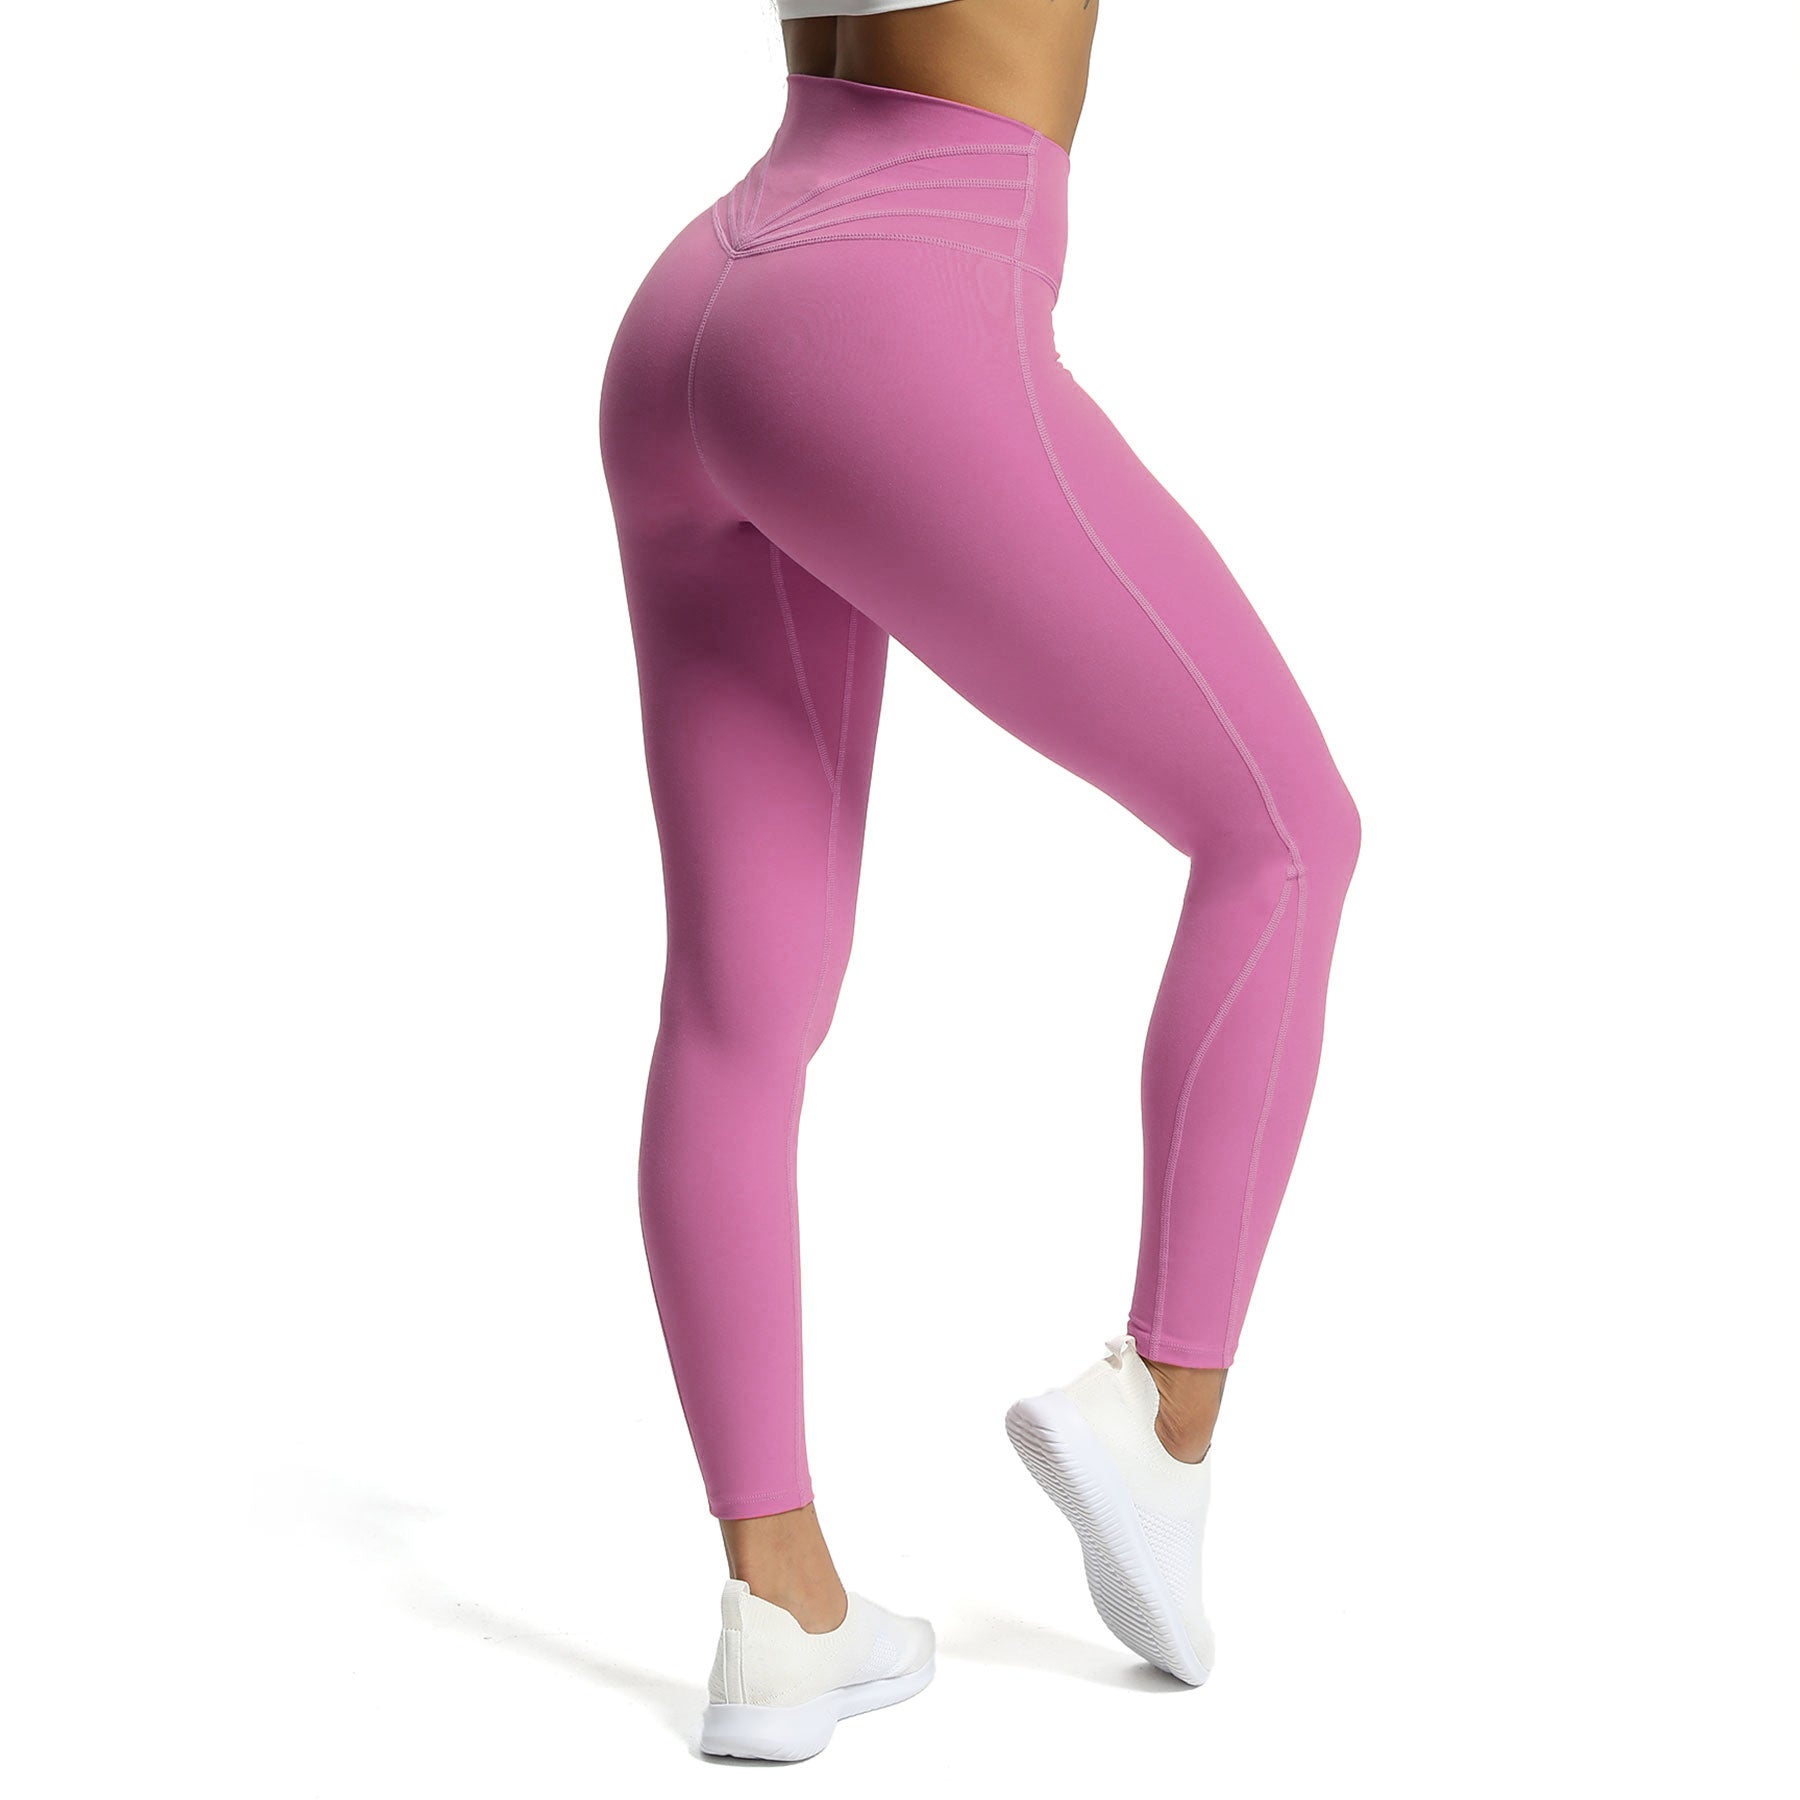 Aoxjox Yoga Pants for Women Workout High Waisted Gym Turkey